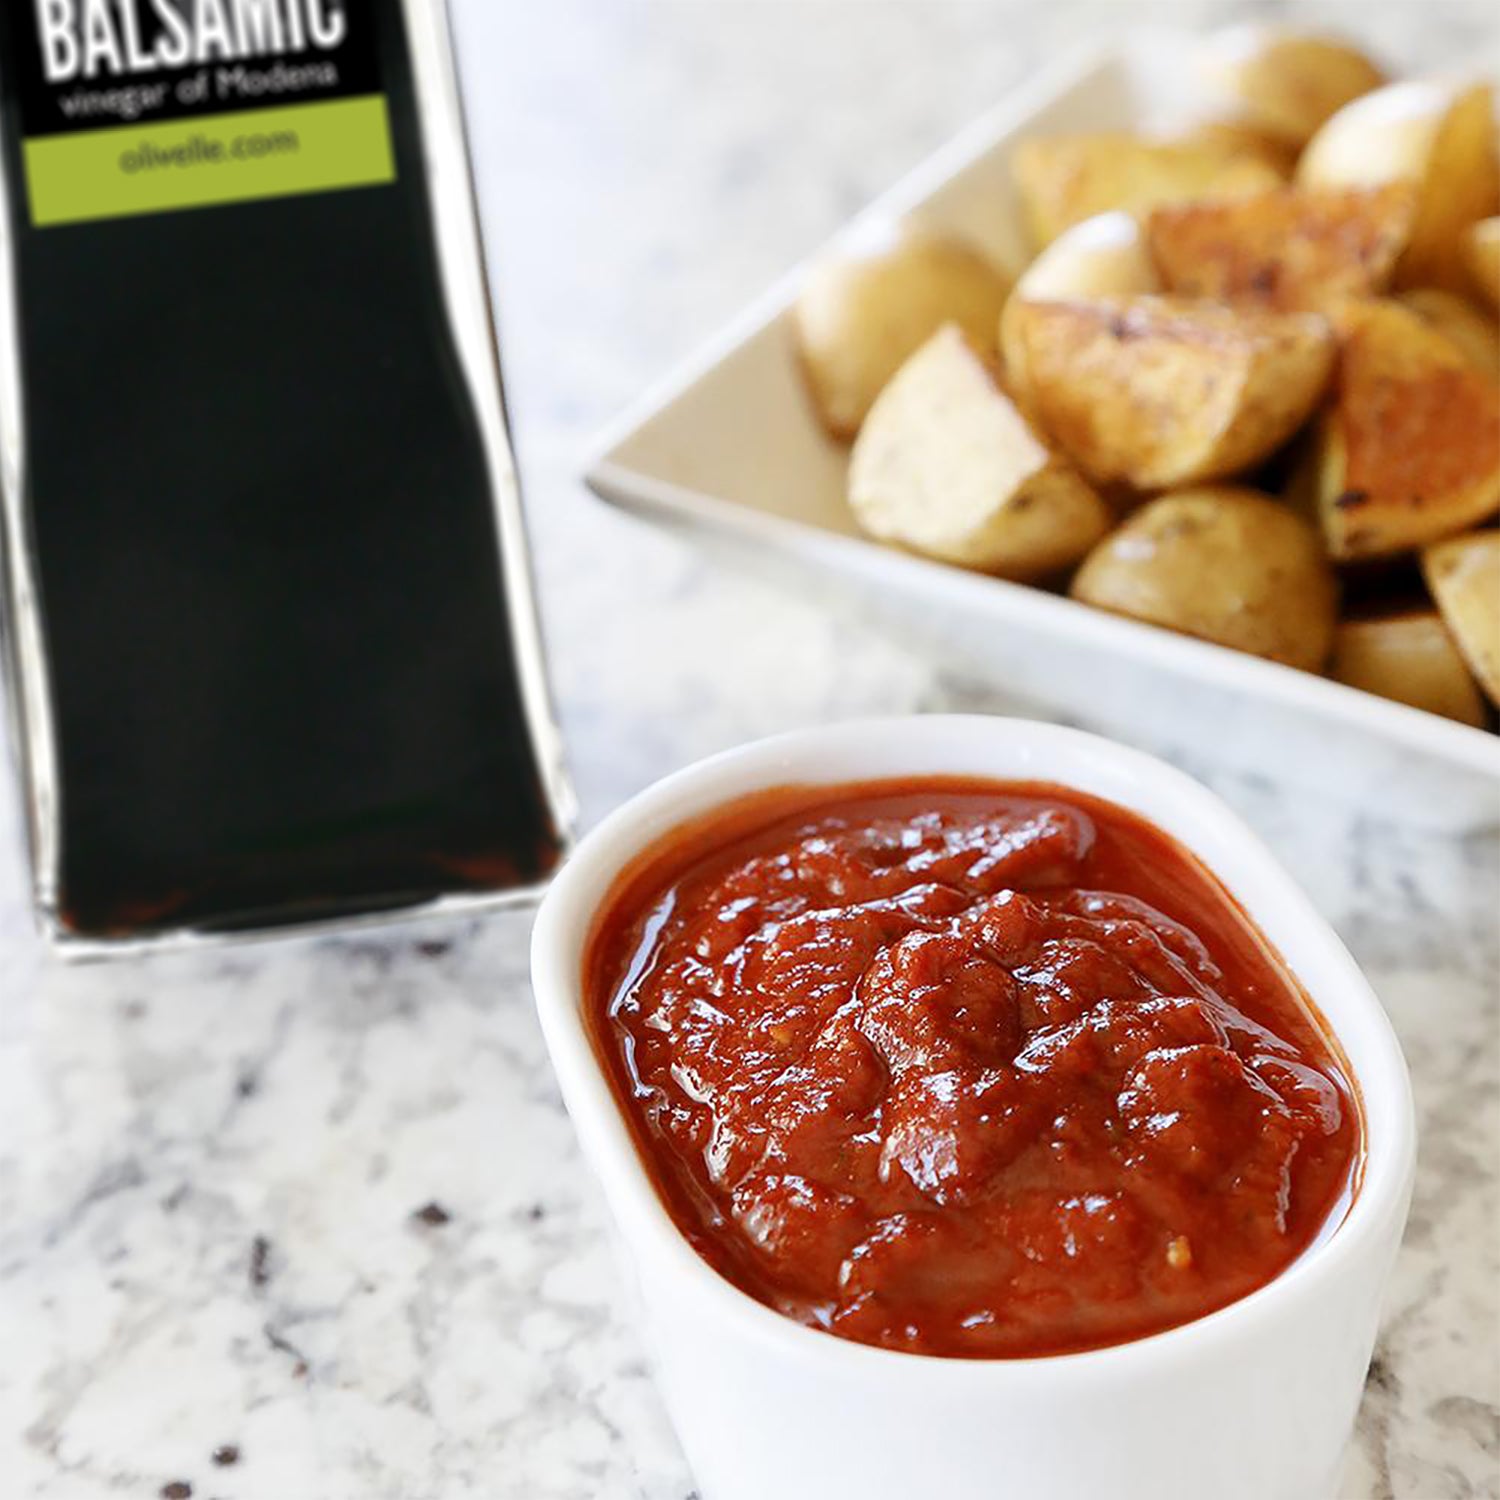 Bruschetta Ketchup made with Sun Dried Tomato Balsamic Vinegar, Roasted Garlic Sea Salt and our Bruschetta Dried Herb Blend served in a white bowl next to roasted potatoes. 